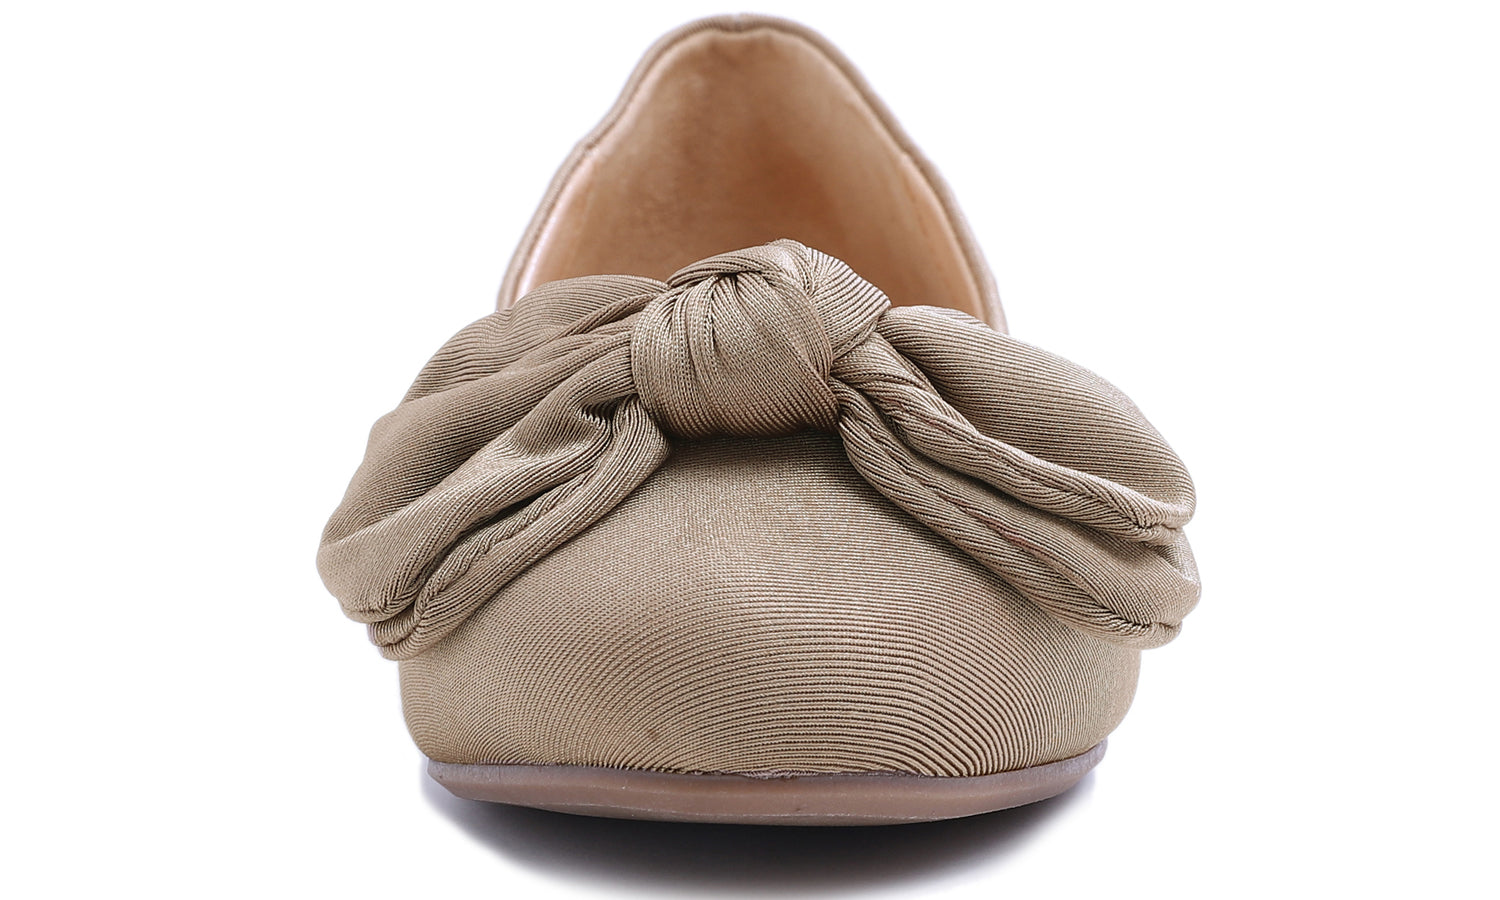 Feversole Women's Round Toe Cute Bow Trim Ballet Flats Taupe